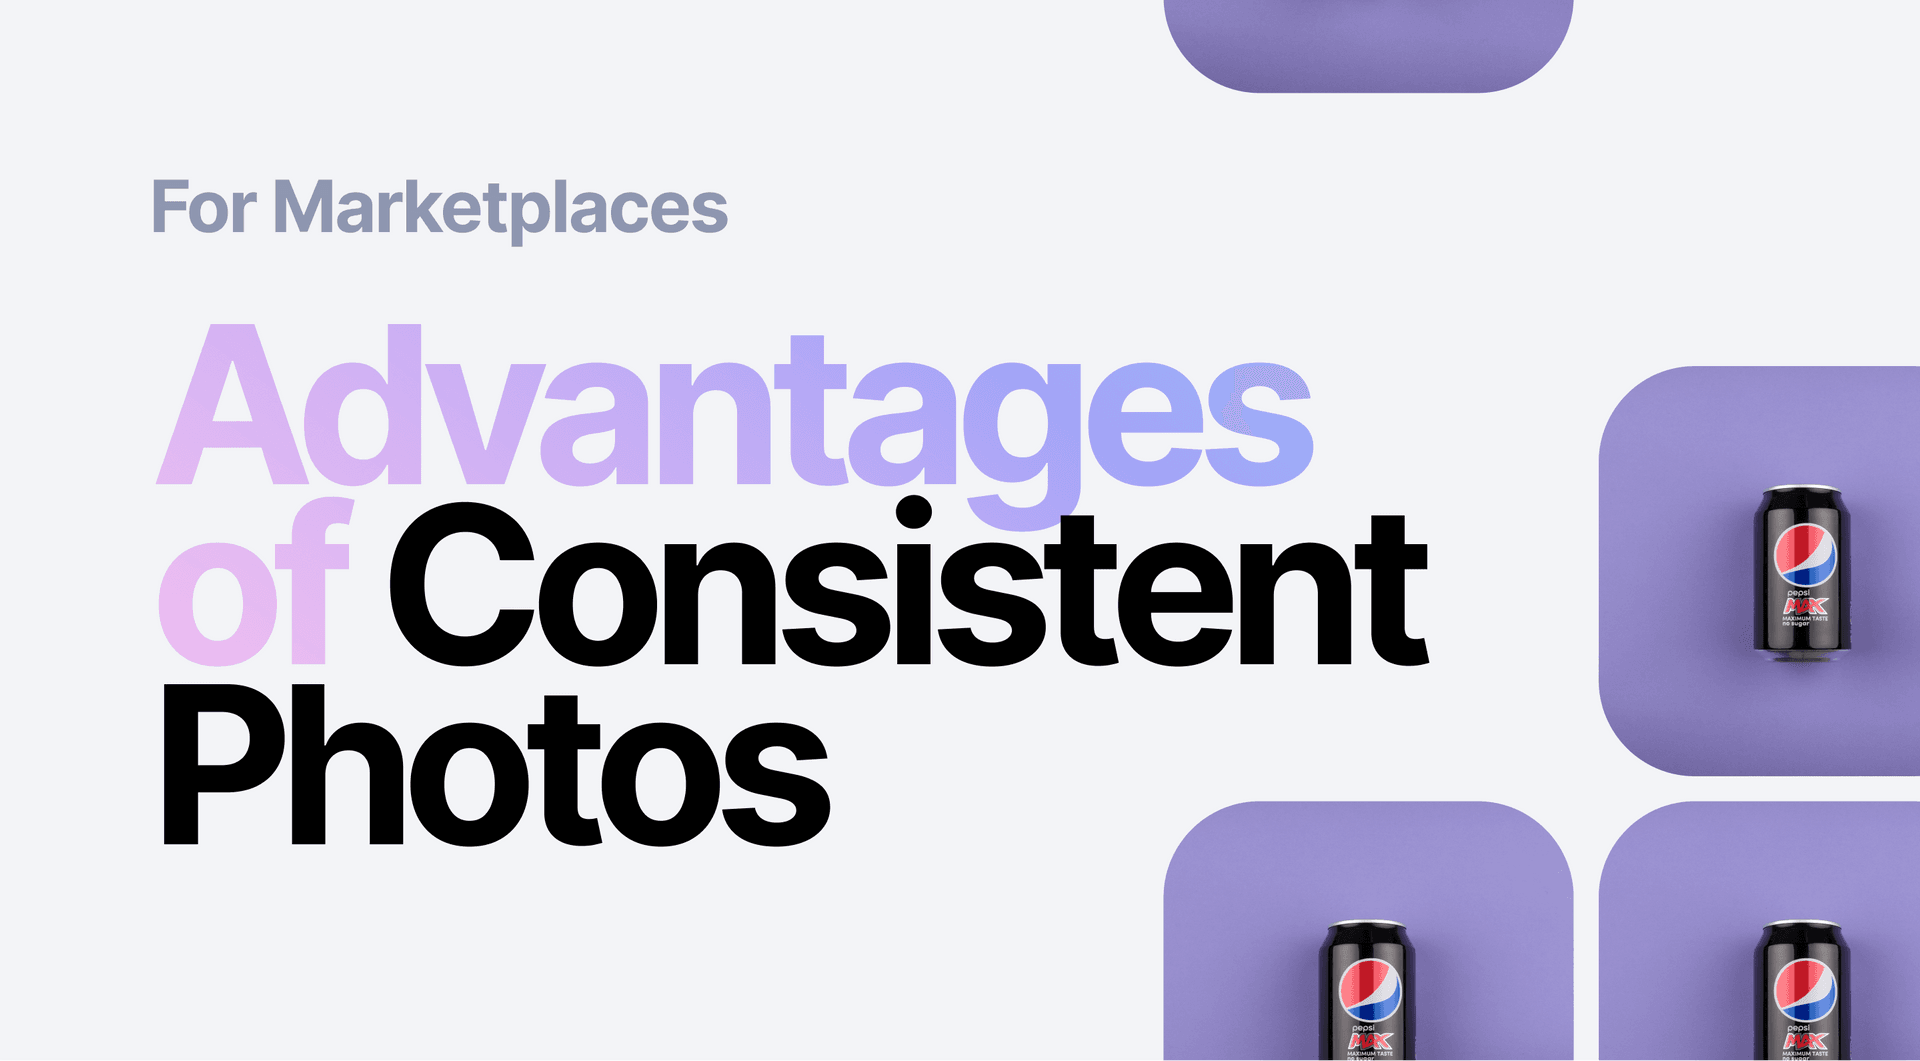 Picture for The Benefits of Consistent Visual Content and Product Images article